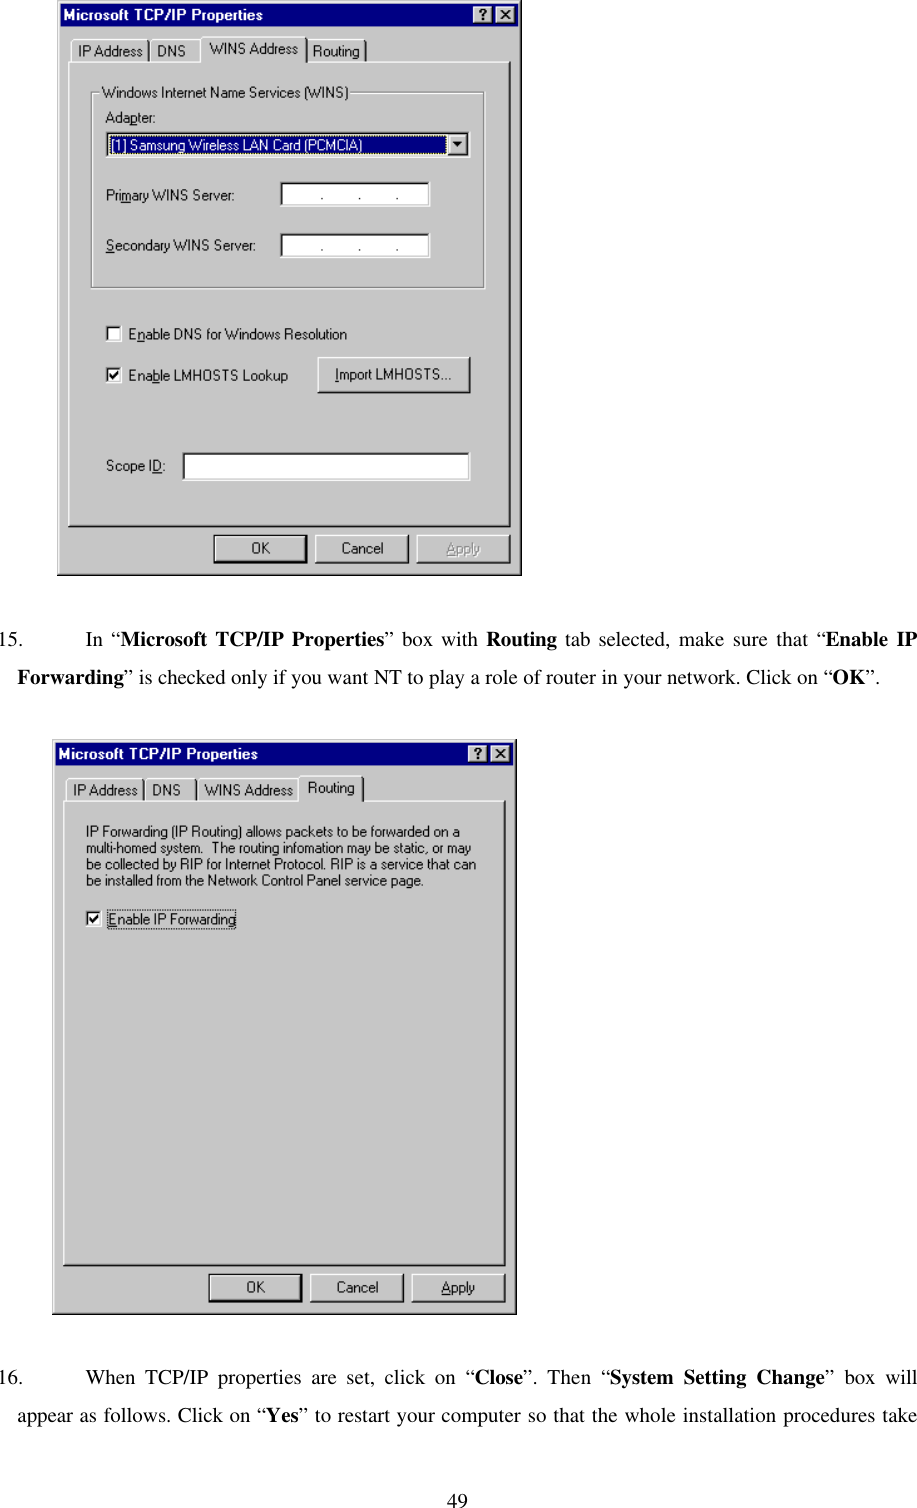 49           15. In “Microsoft TCP/IP Properties” box with Routing tab selected, make sure that “Enable IPForwarding” is checked only if you want NT to play a role of router in your network. Click on “OK”.          16. When TCP/IP properties are set, click on “Close”. Then “System Setting Change” box willappear as follows. Click on “Yes” to restart your computer so that the whole installation procedures take